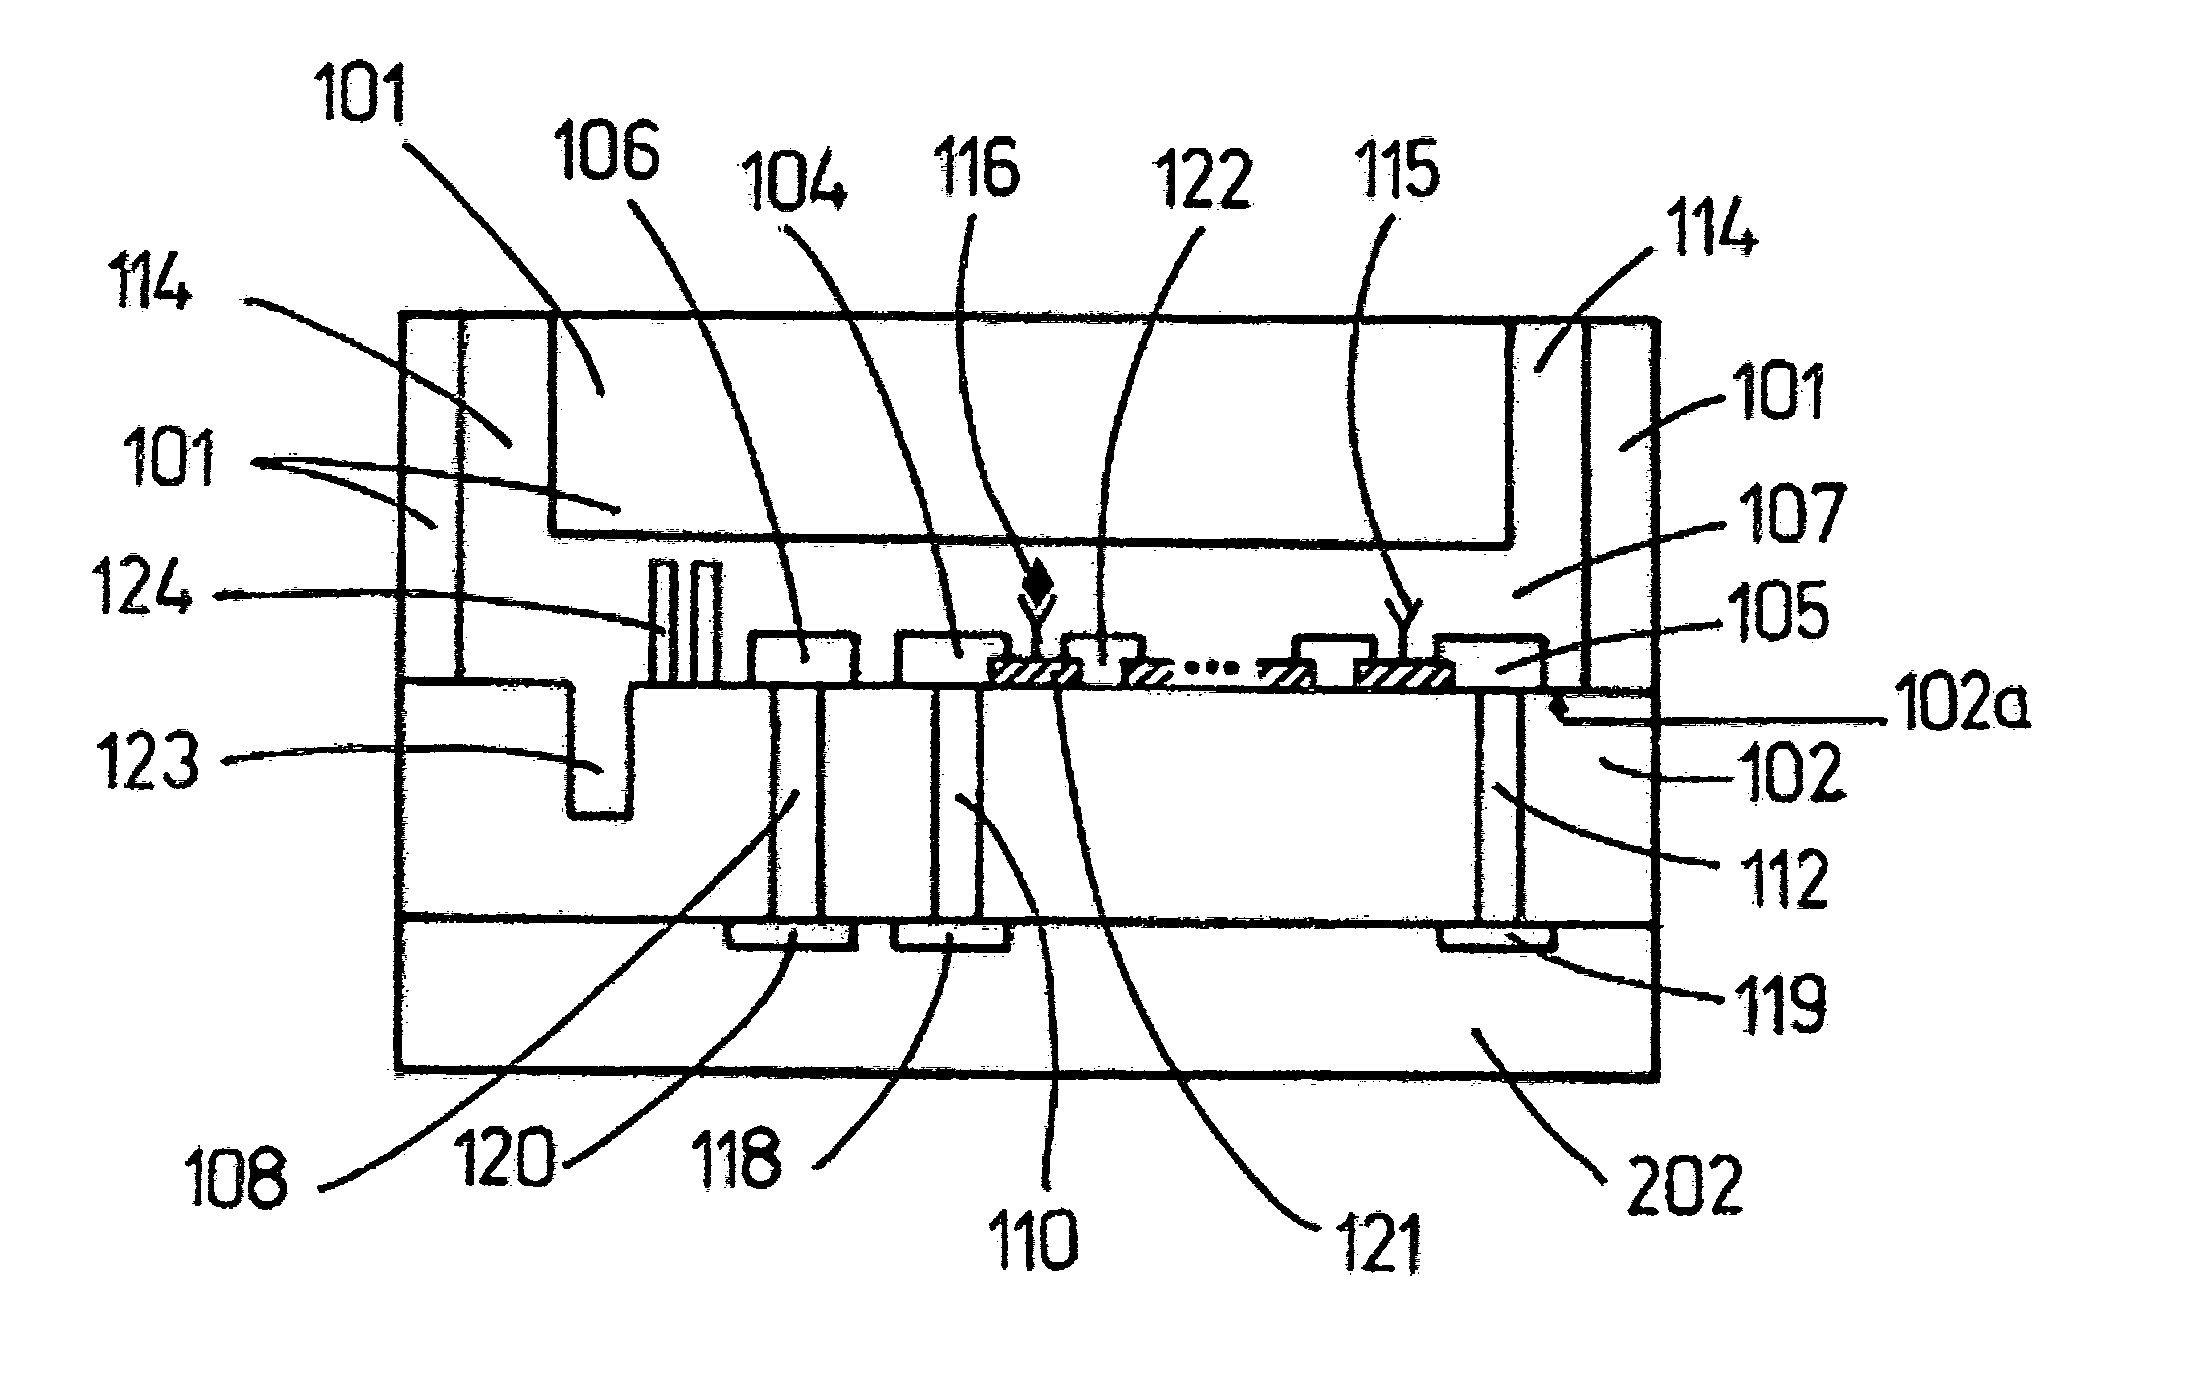 Integrated sensing device and related methods